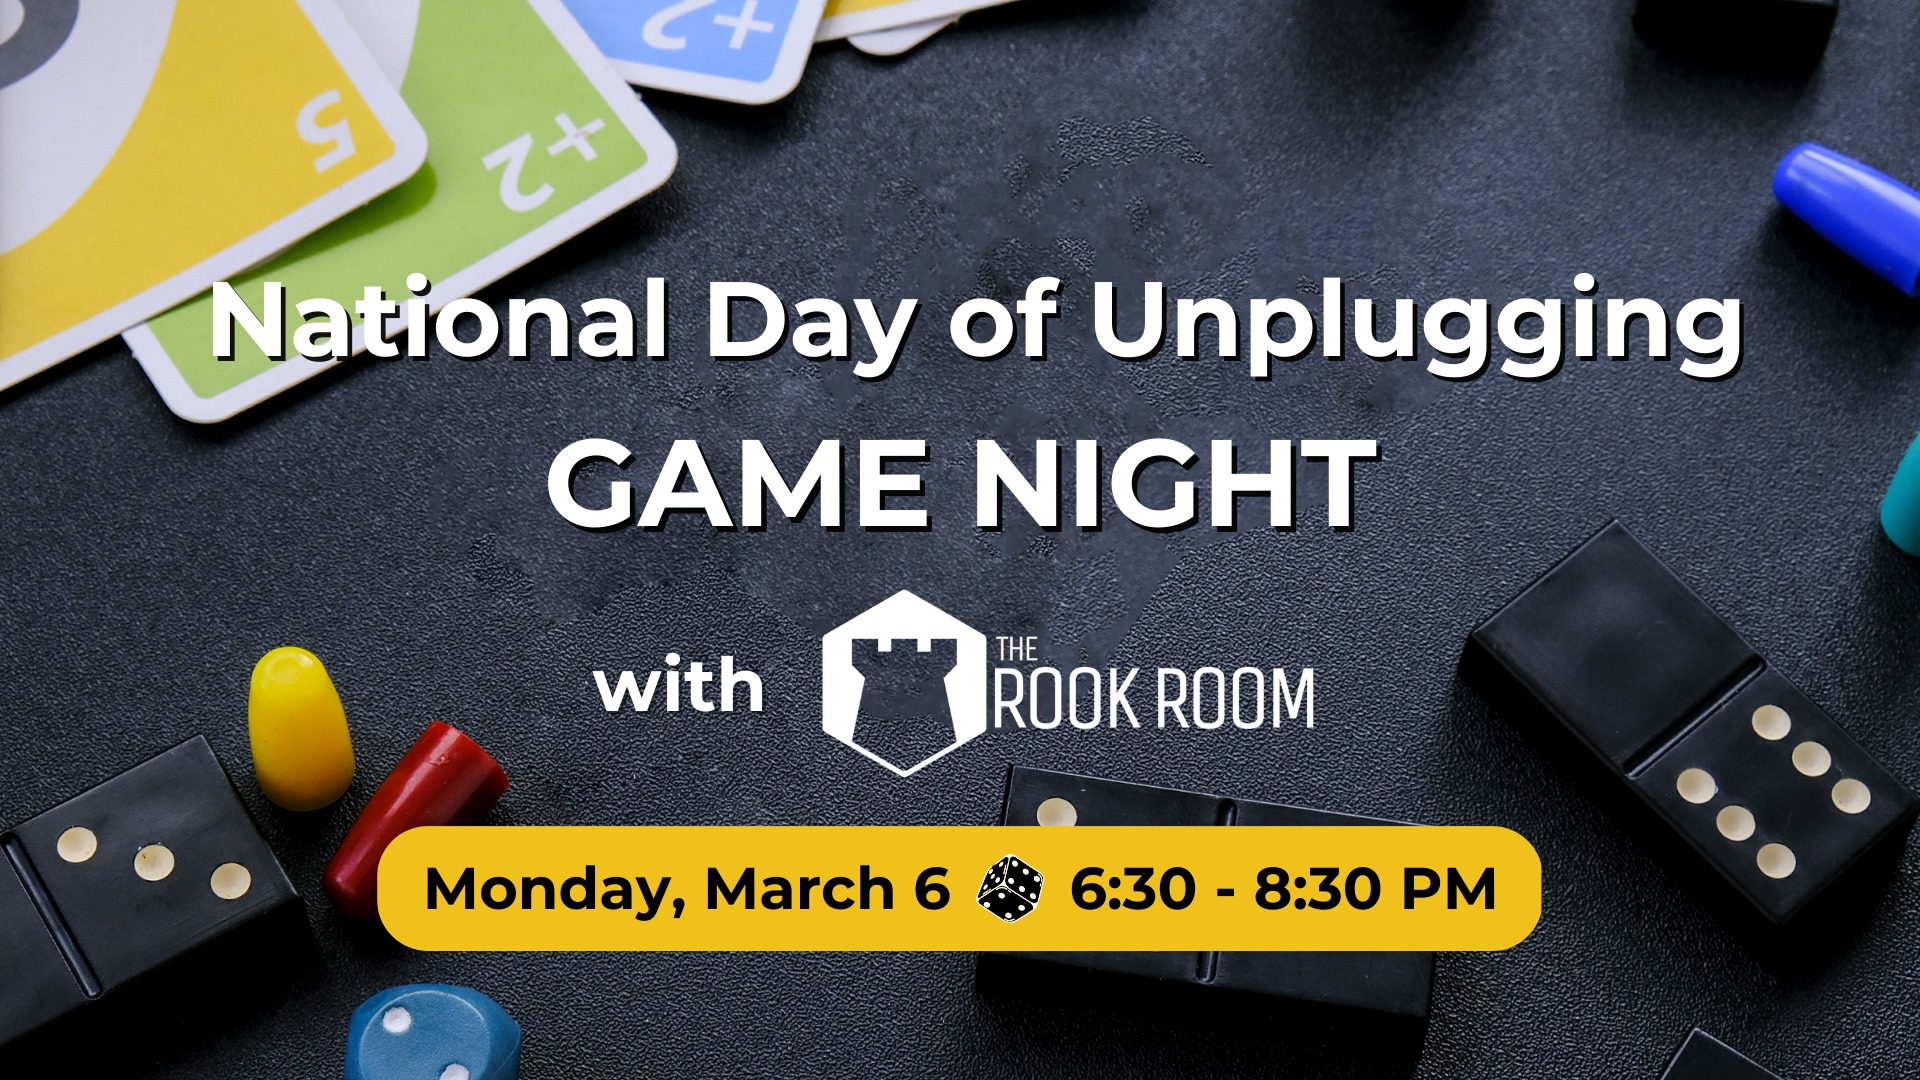 National Day of Unplugging Game Night at West Des Moines Public Library March 6th, 2023